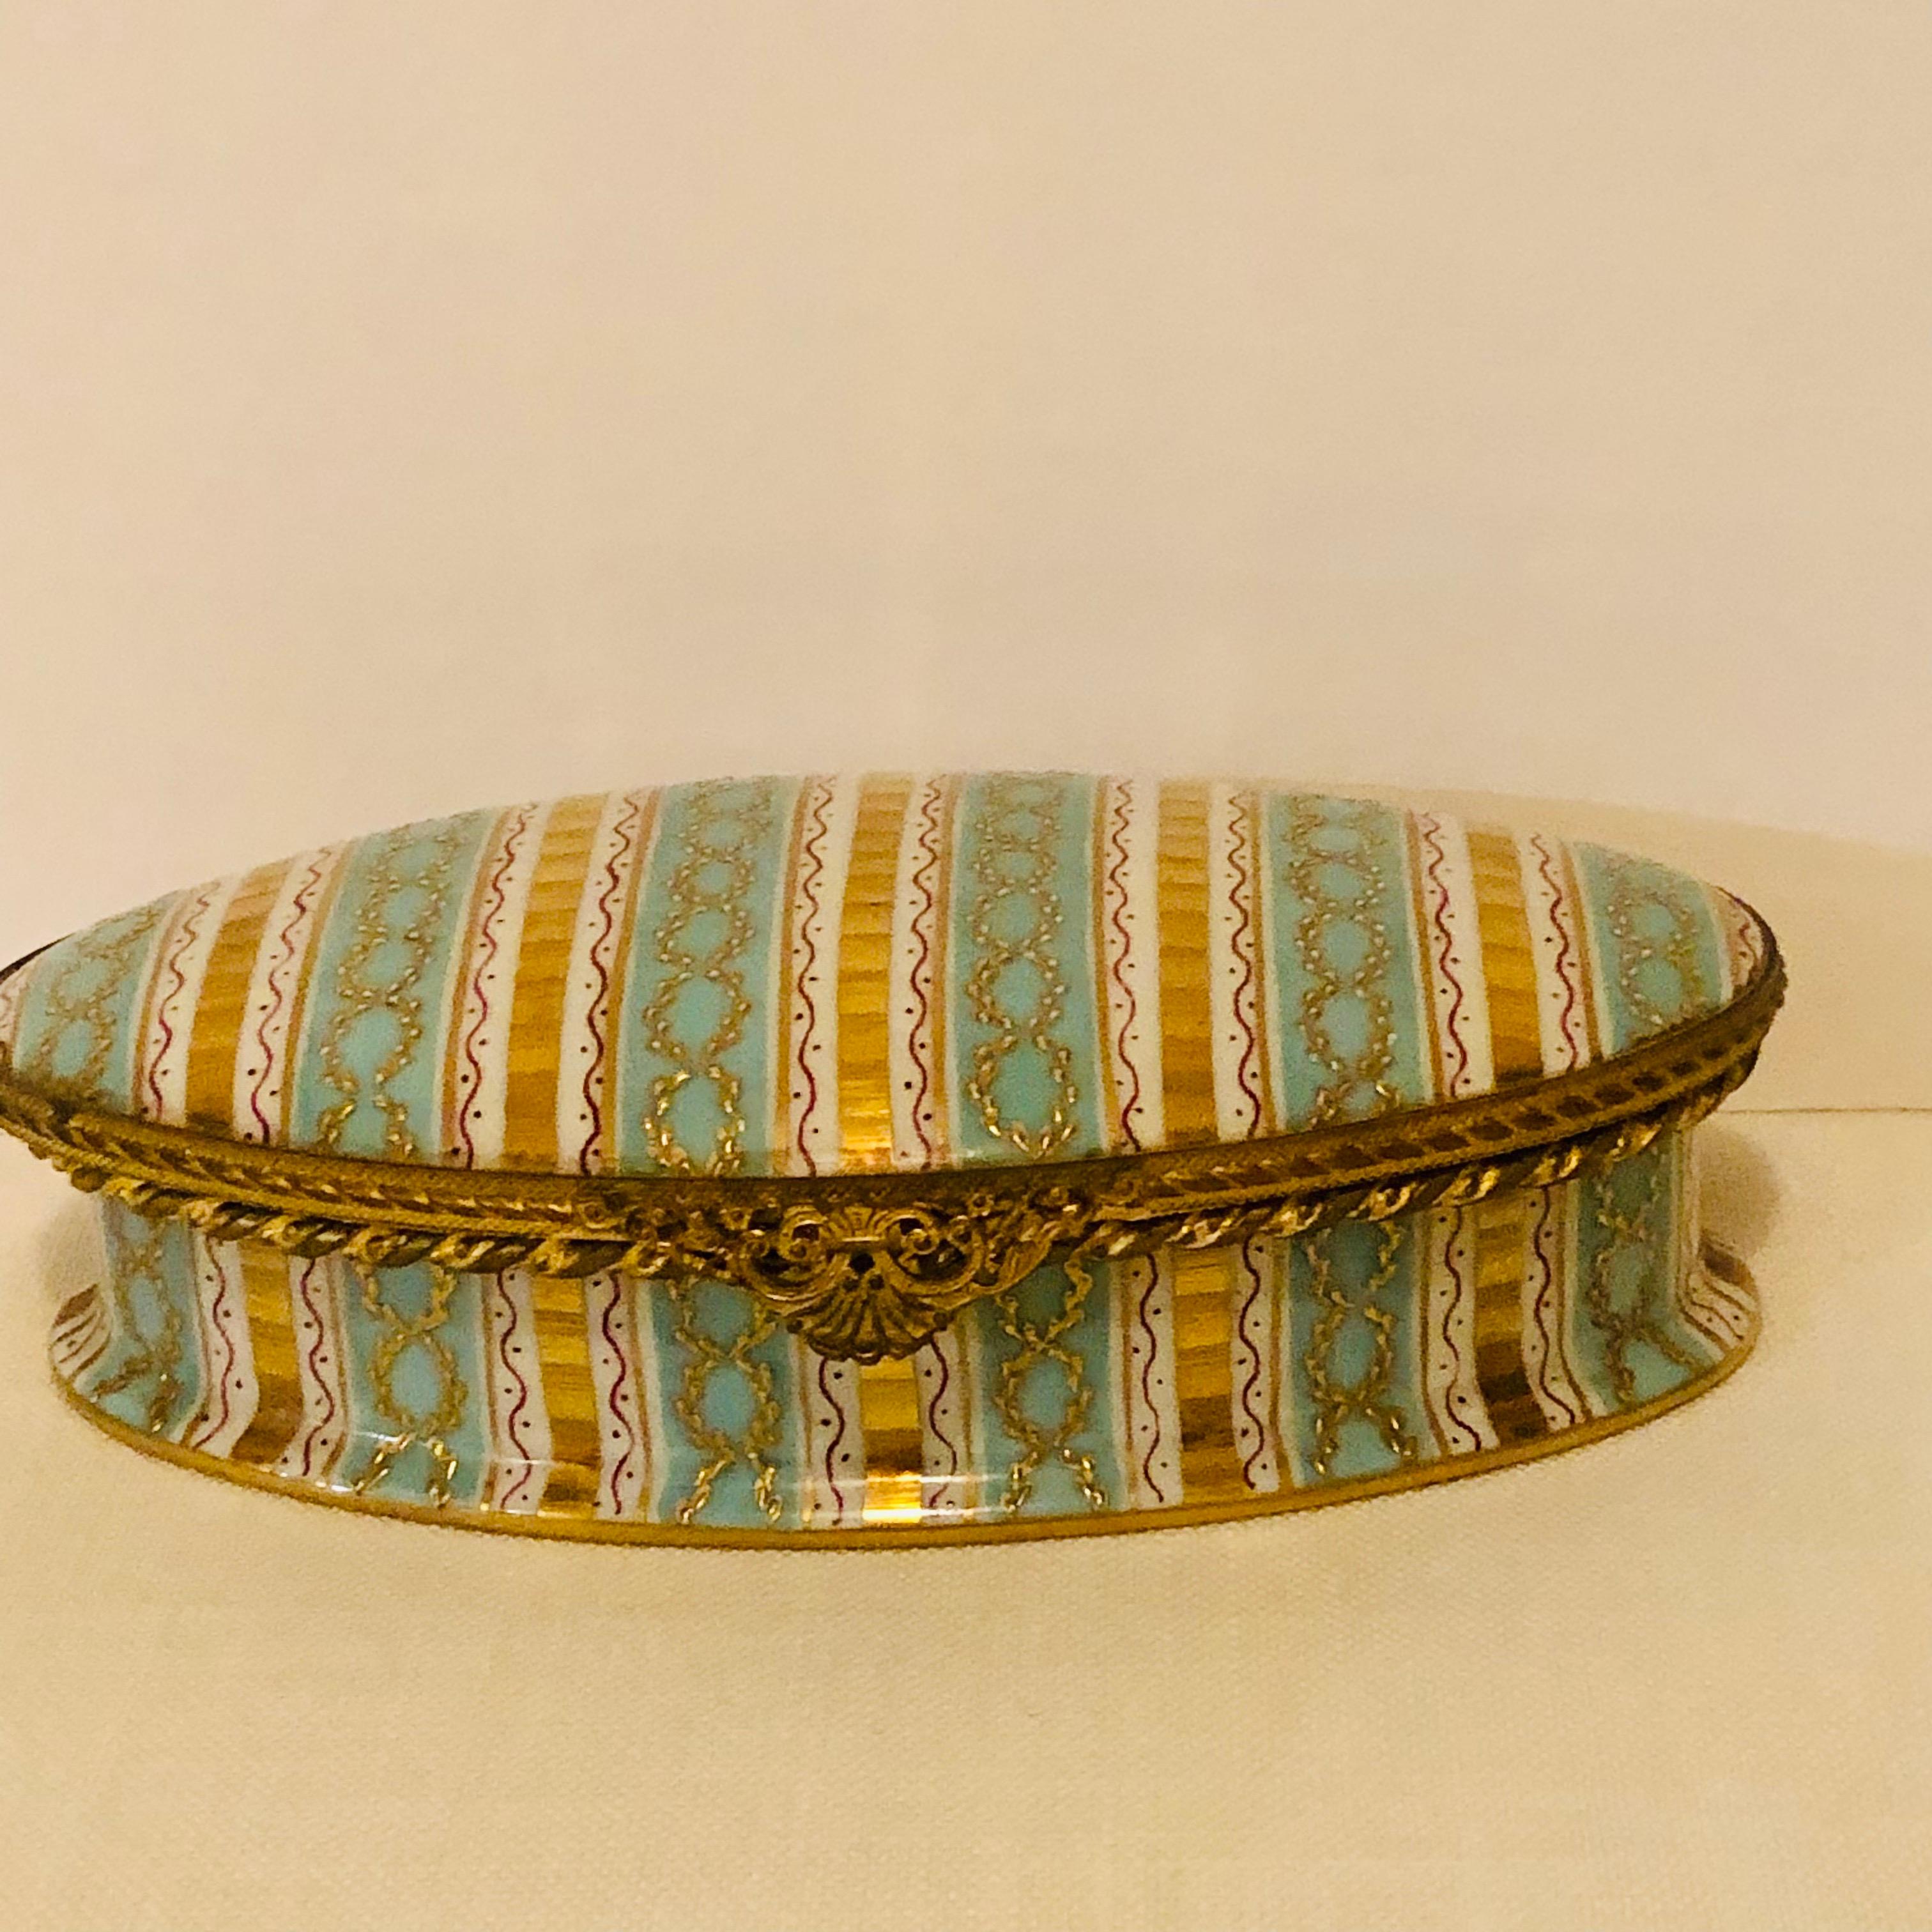 Porcelain Le Tallec Box with Aqua and Gold Stripes and Raised Gold Circular Decoration